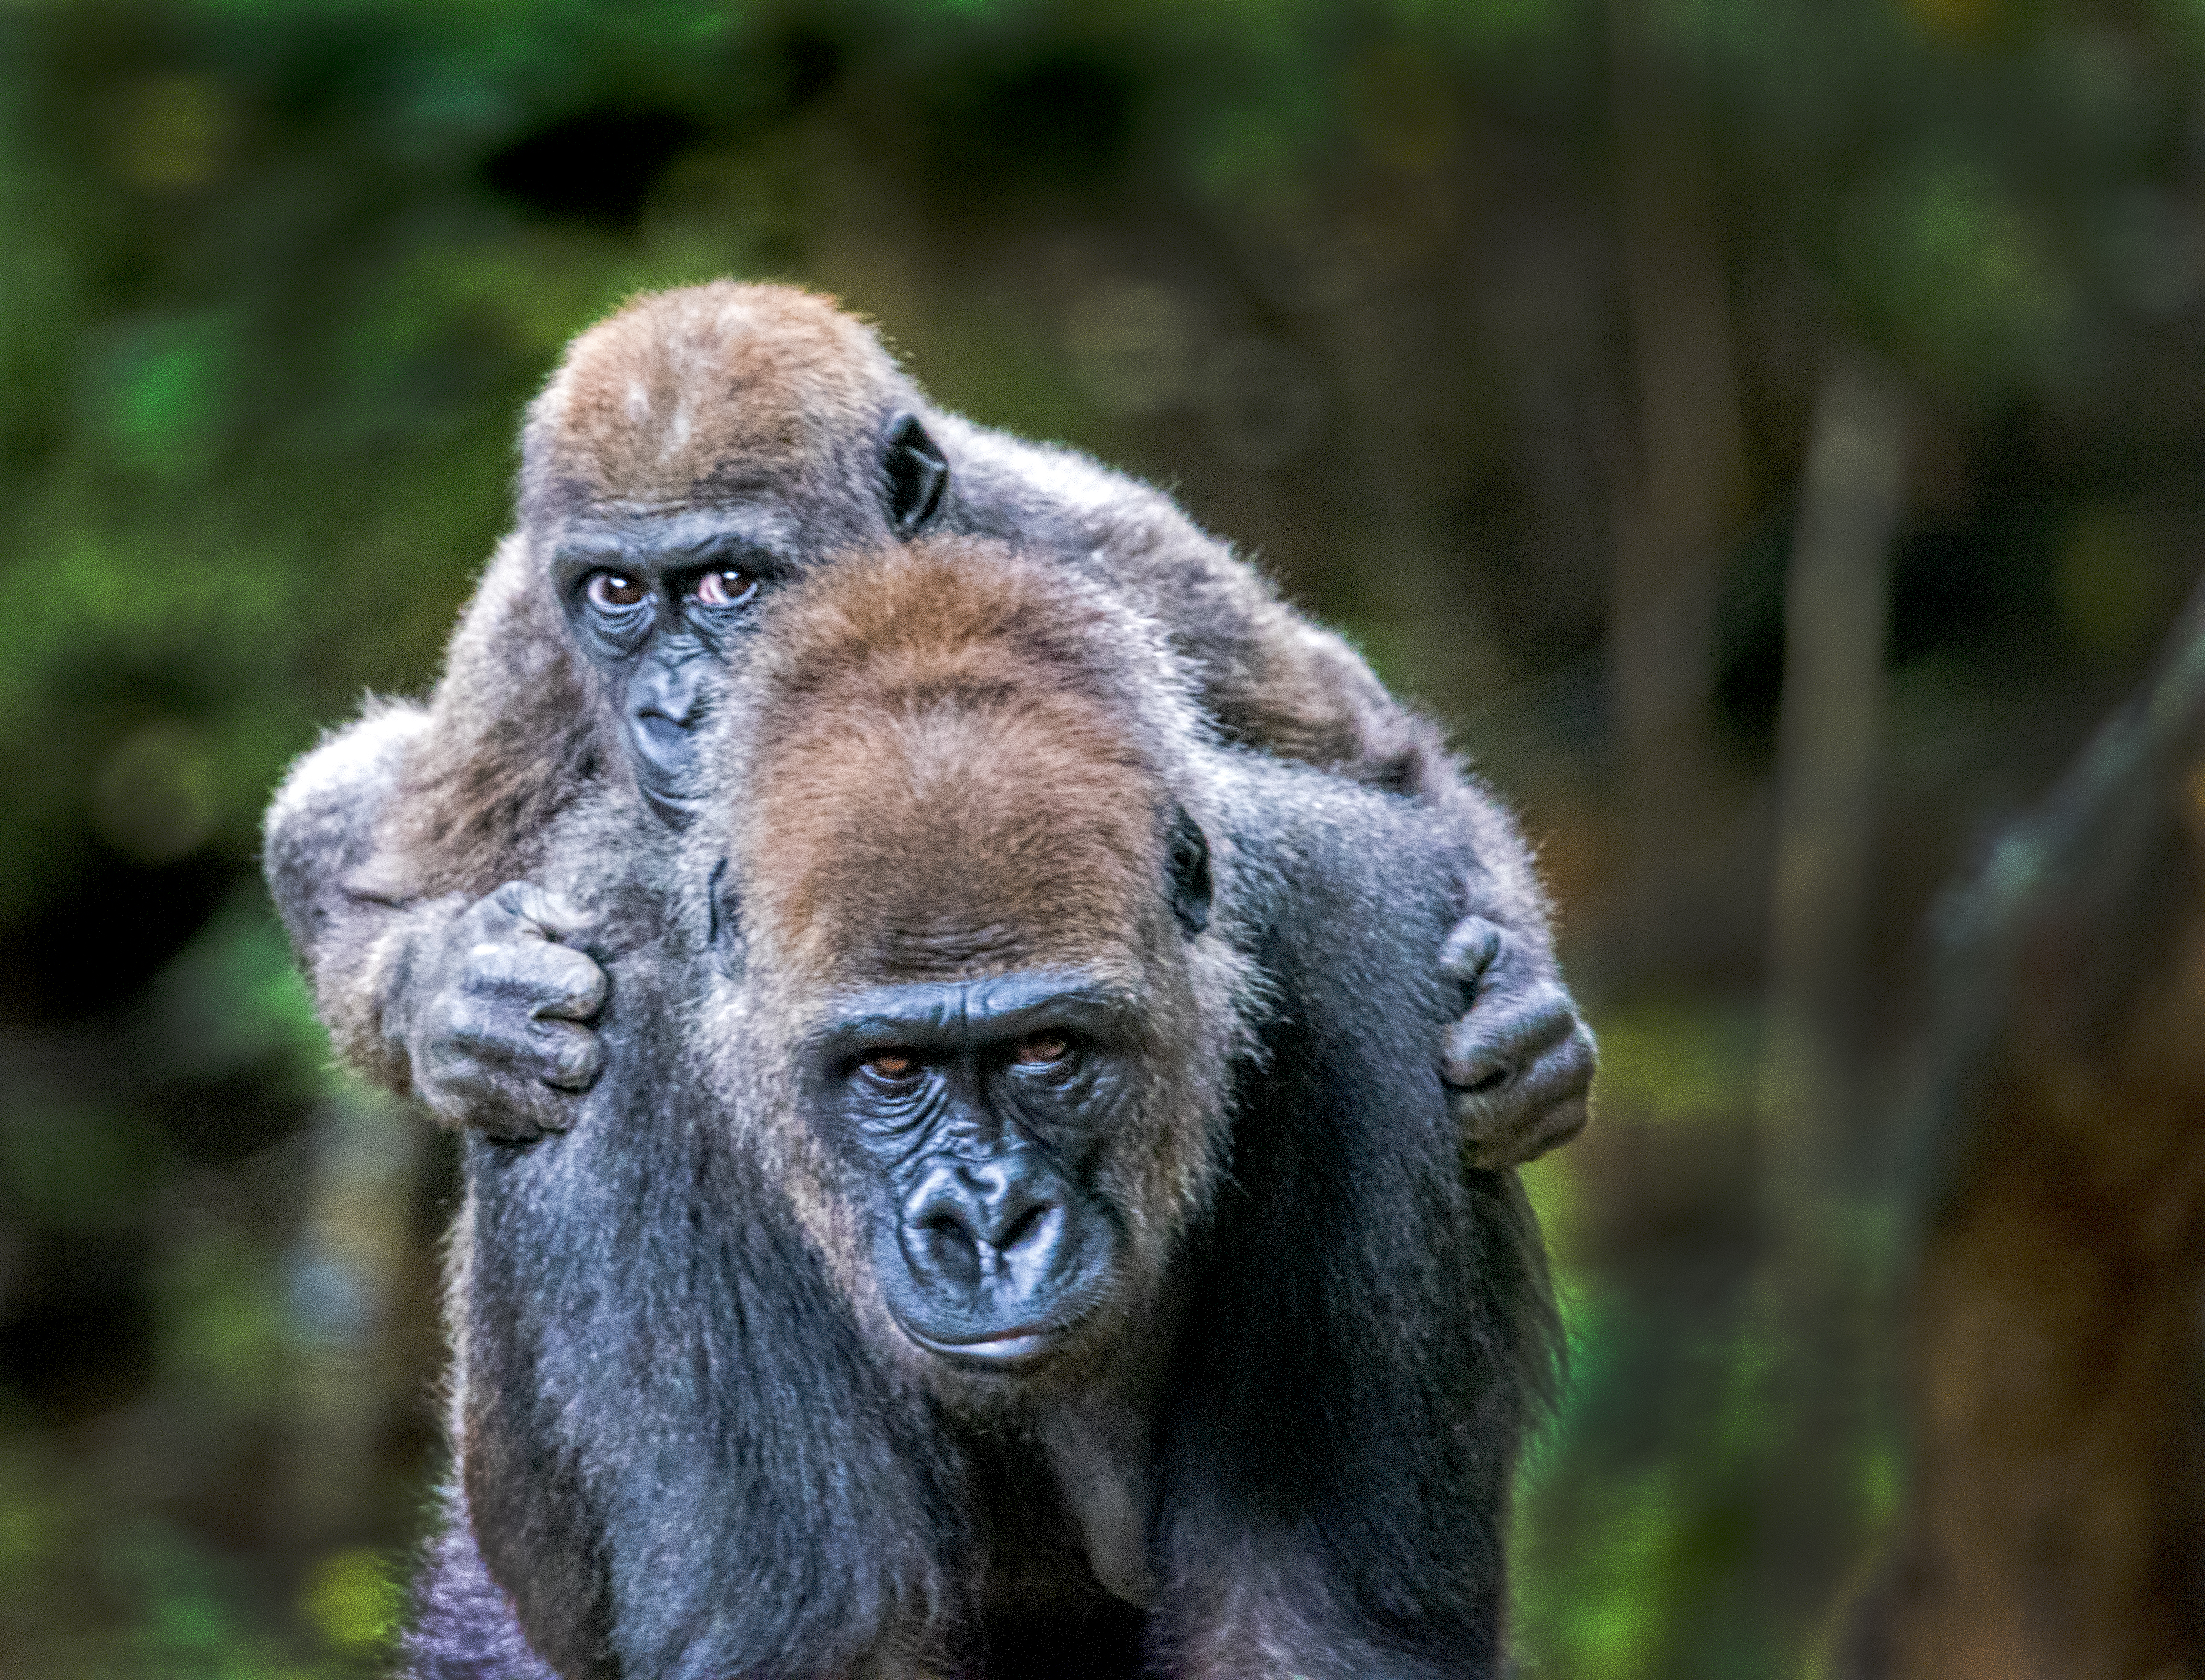 Gorilla baby on Mothers back